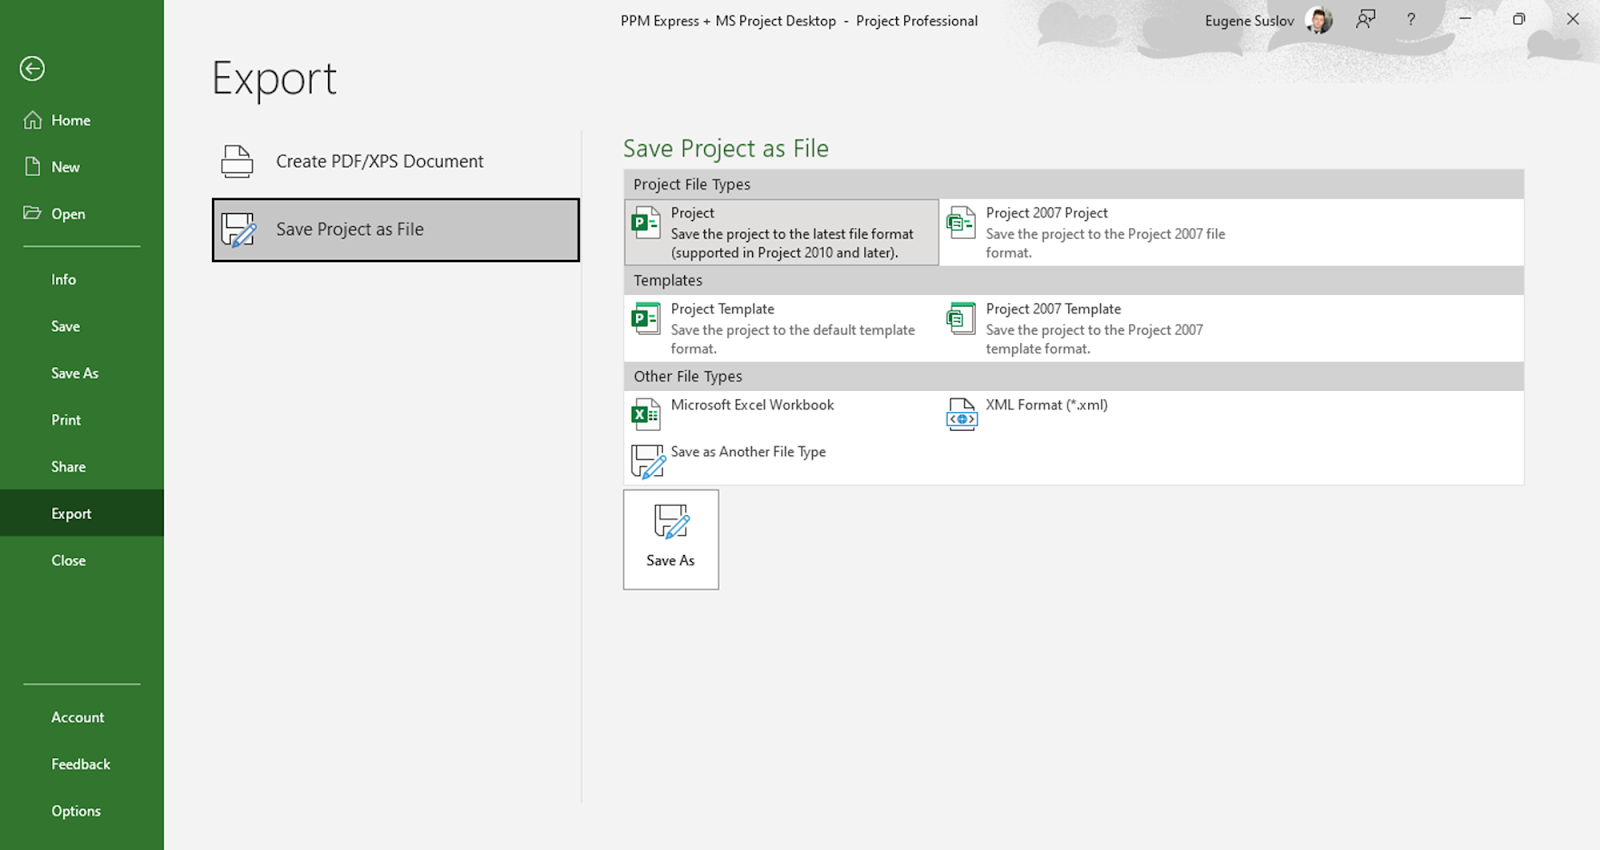 Save file as an MPP in Project Desktop